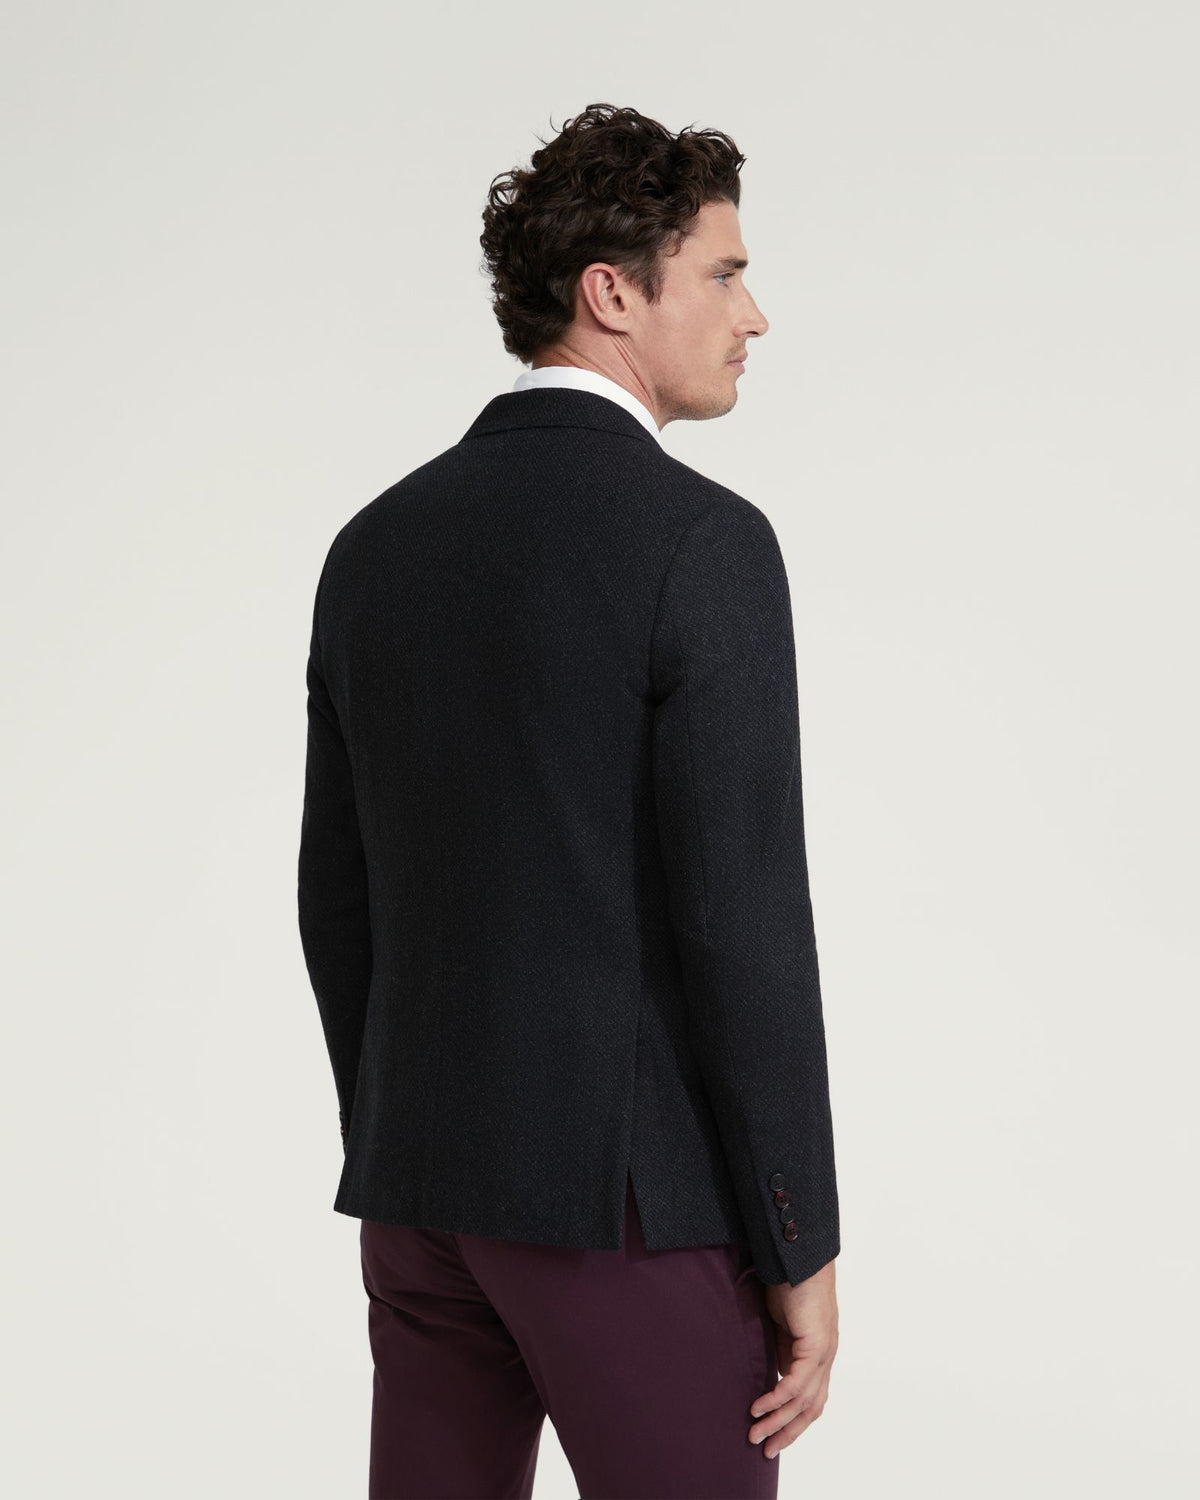 BLAKE WOOL RICH BLAZER - AVAILABLE ~ 1-2 weeks MENS JACKETS AND COATS